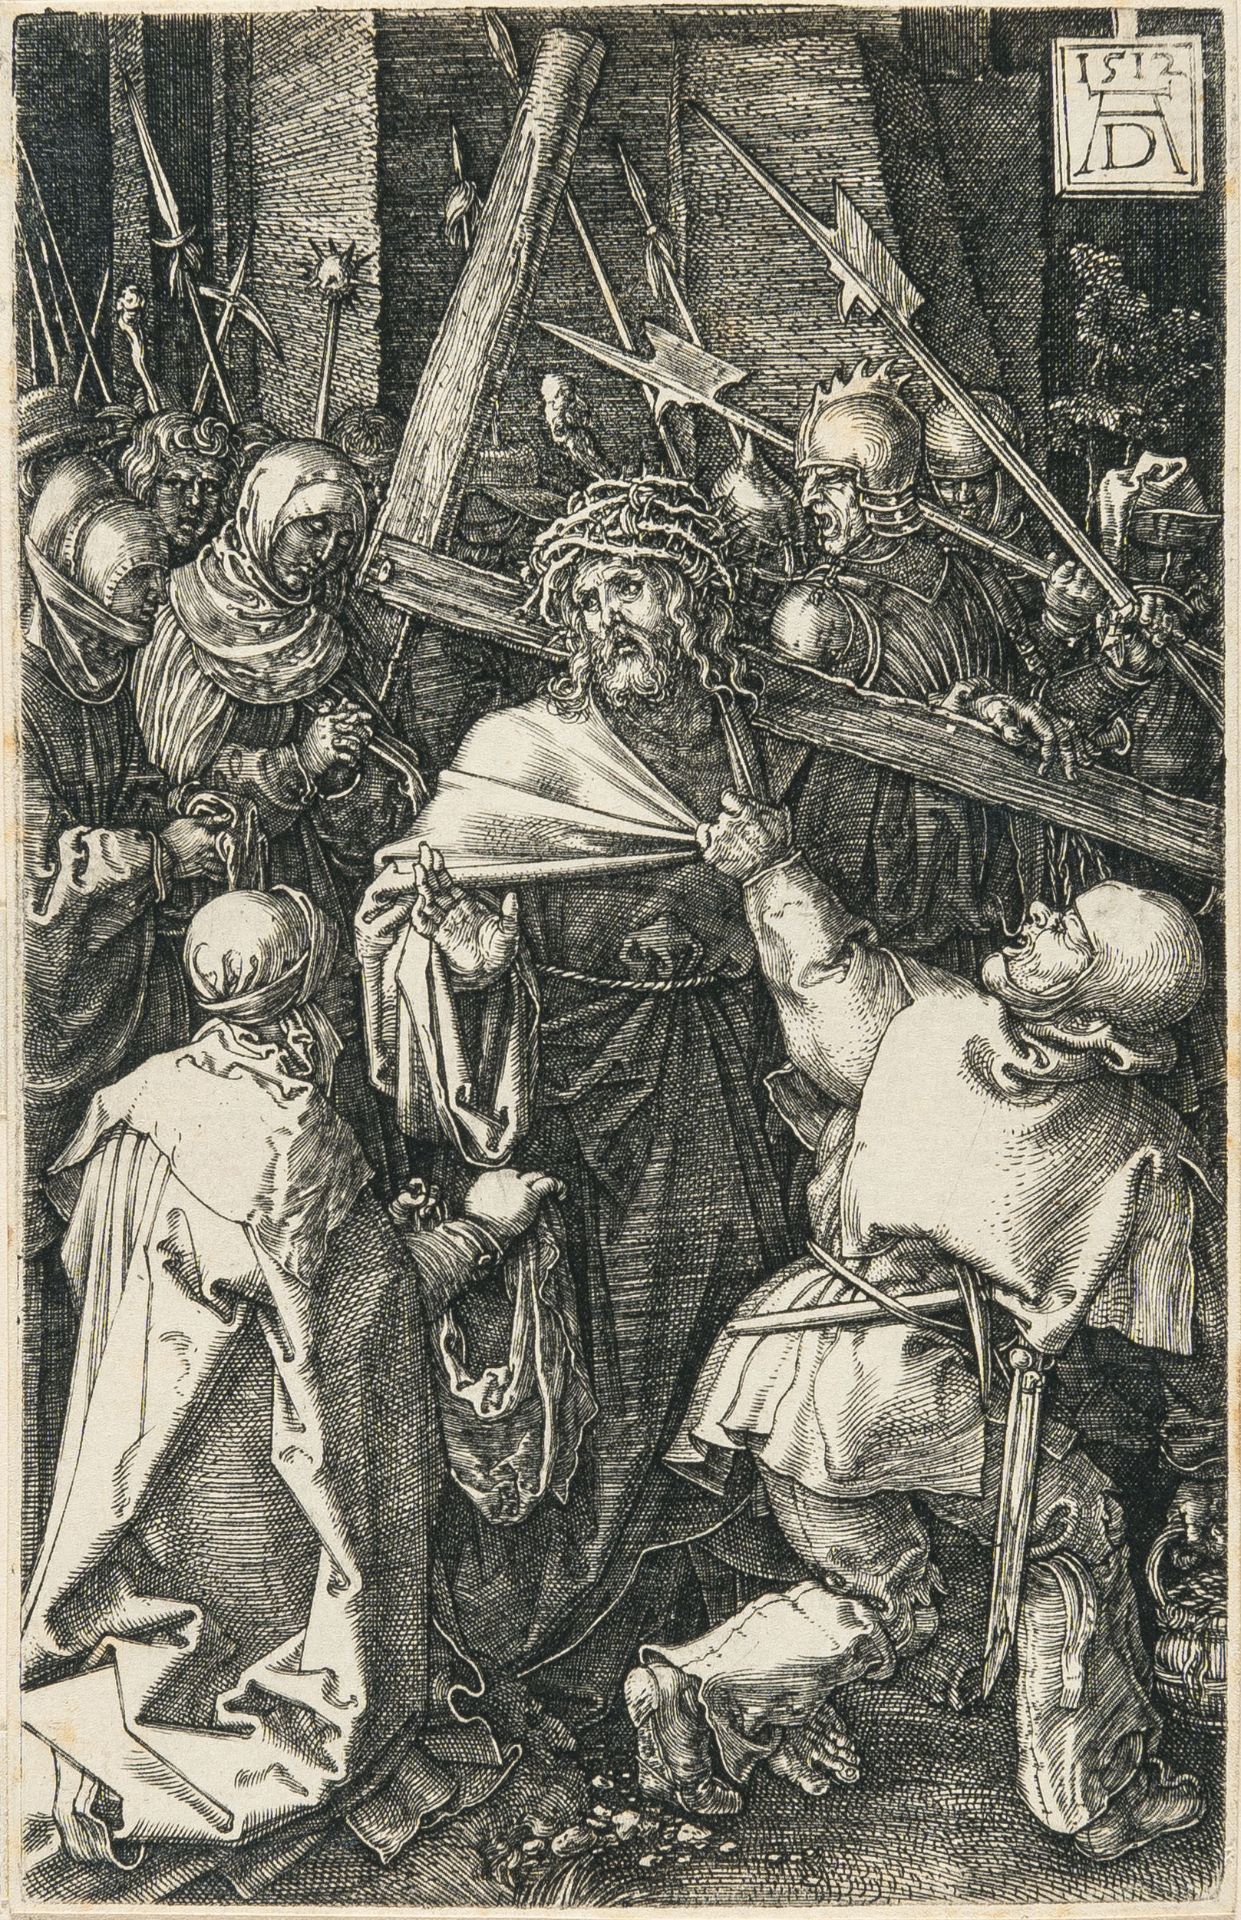 Albrecht Dürer, The Carrying of the Cross.Engraving on laid paper. (1512). 11.7 x 7.5 cm (sheet